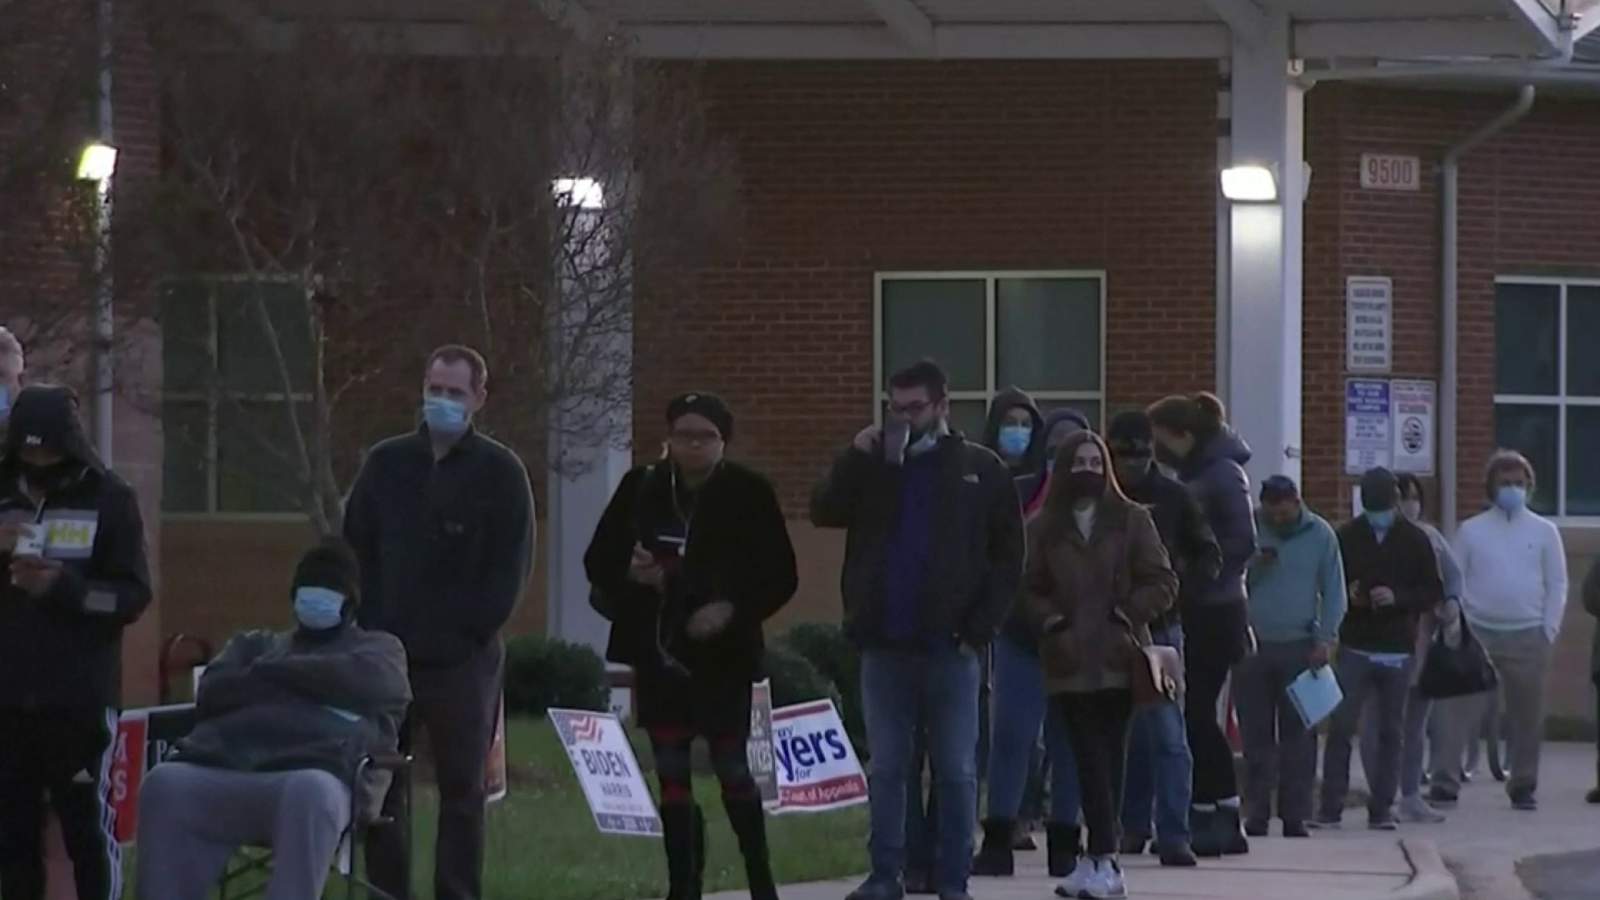 NAACP issues call to action after Detroit’s historic voter turnout